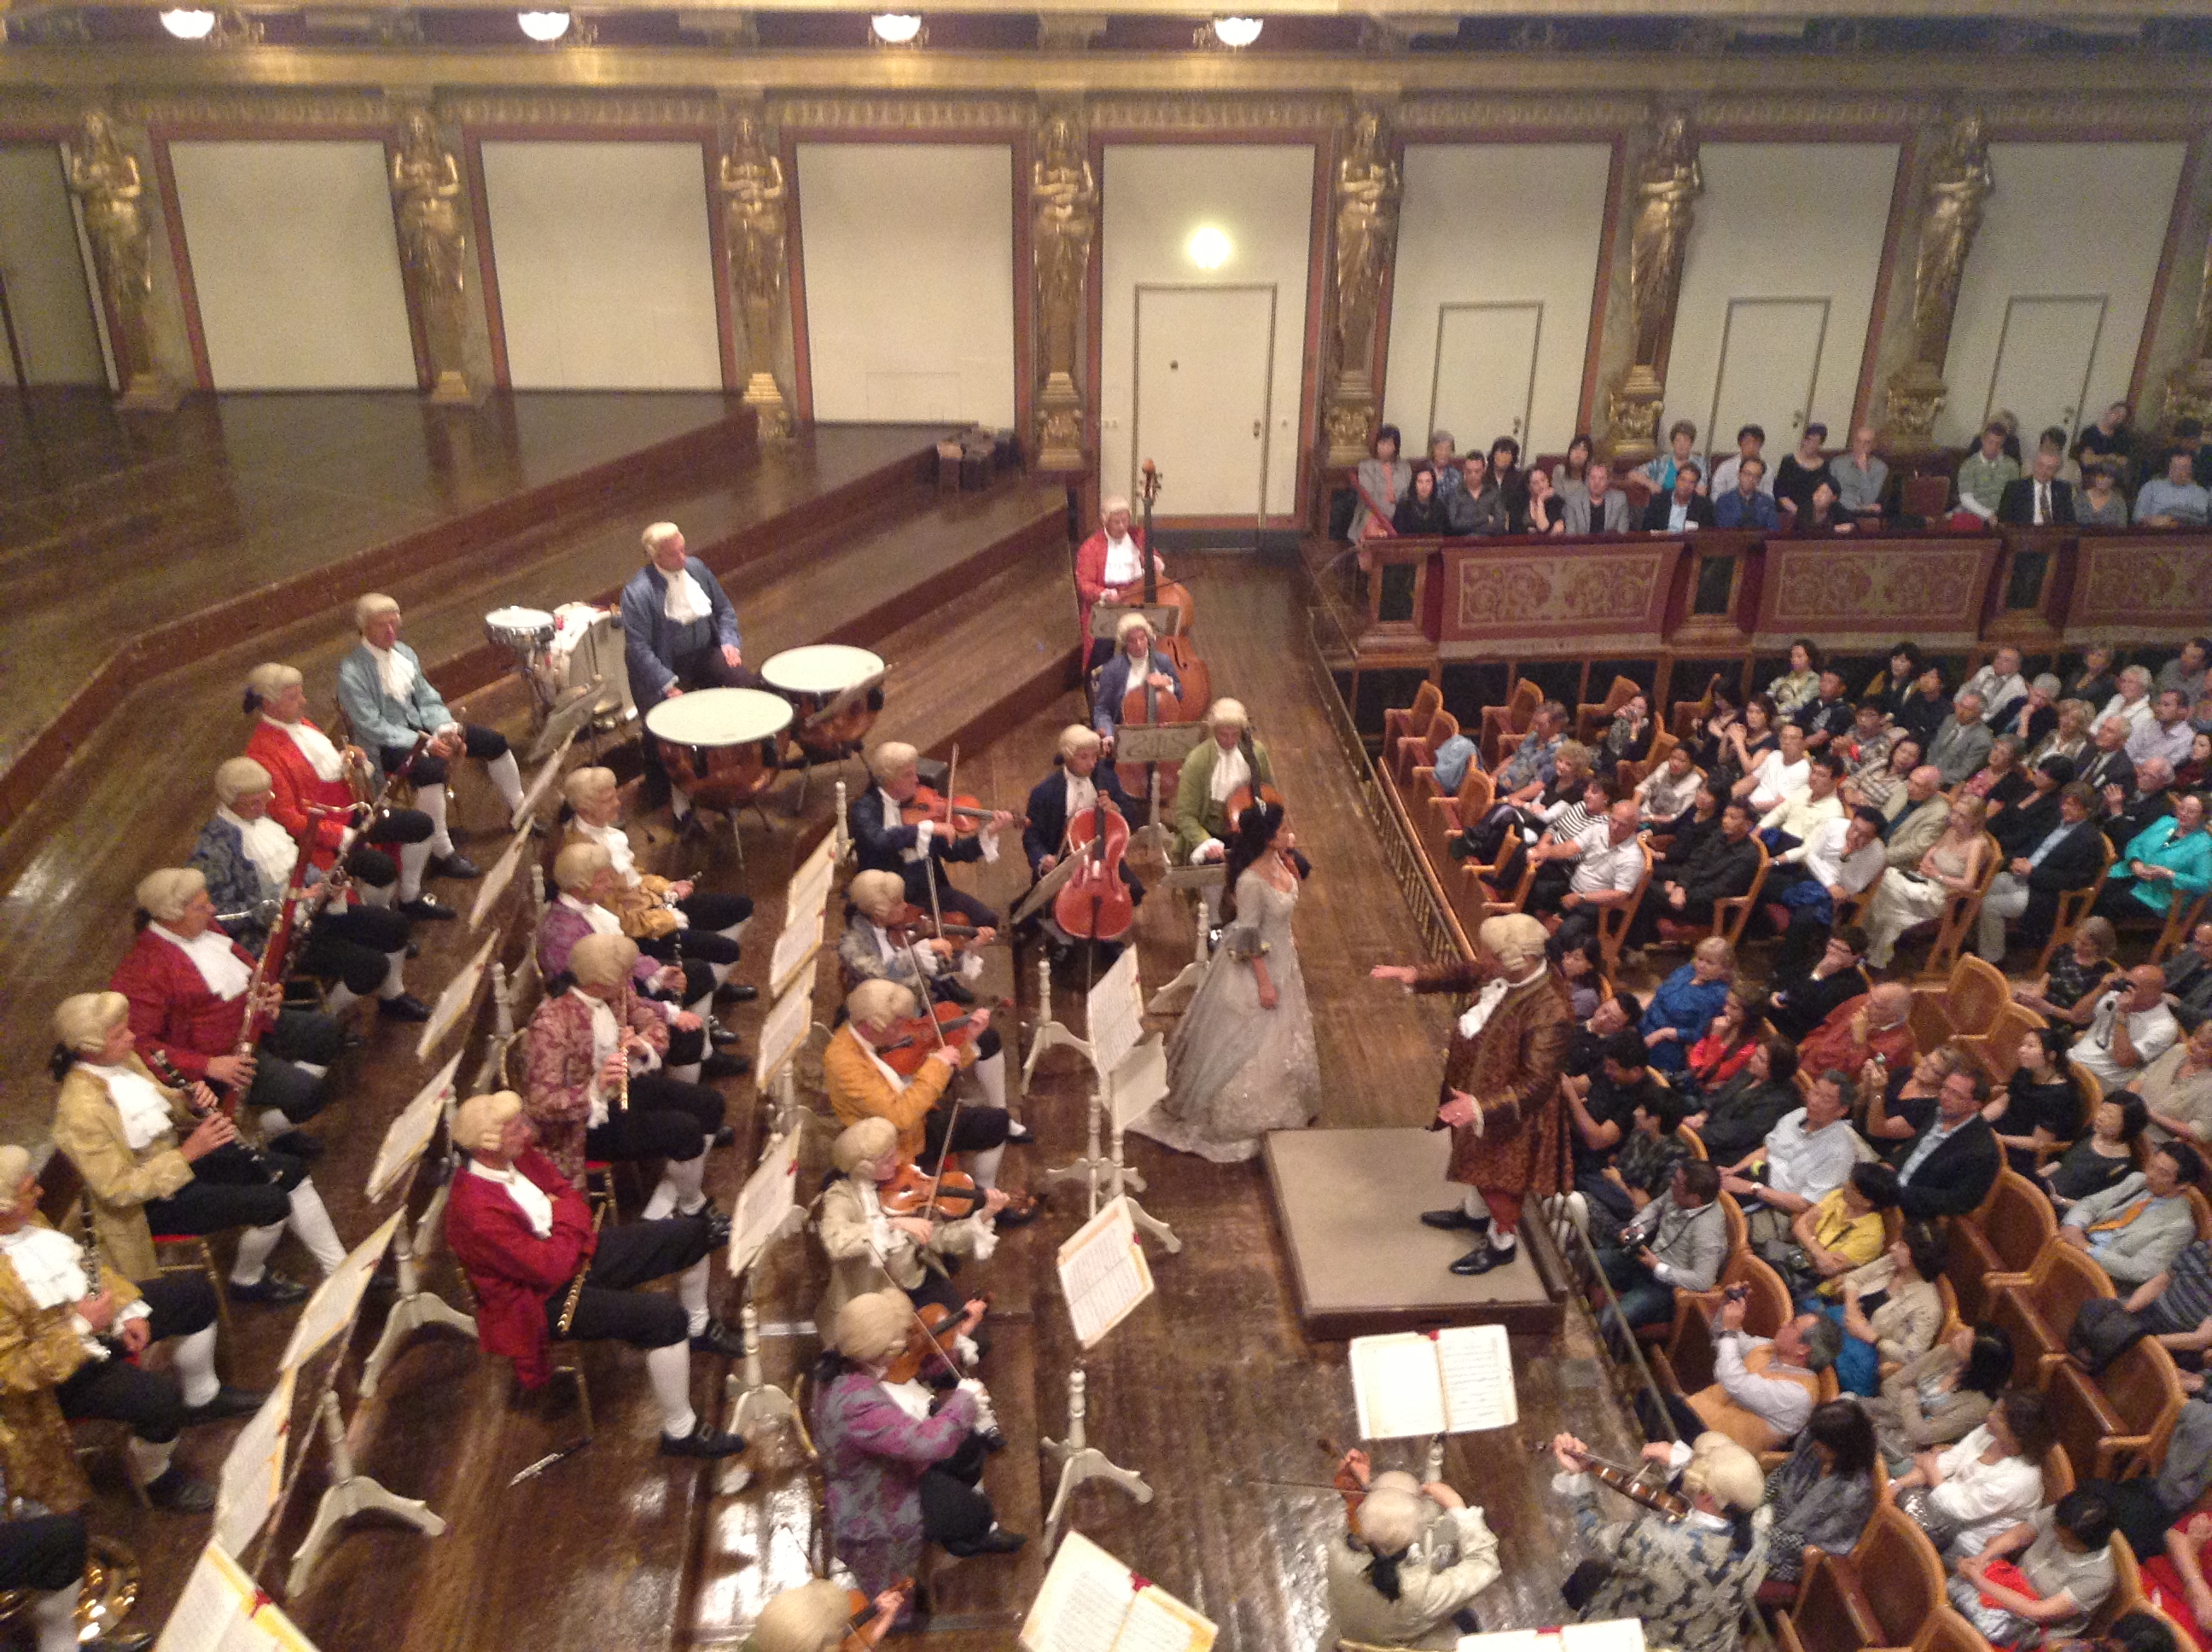 Musicians in costume perform Mozart at the Musikverein Golden Hall.